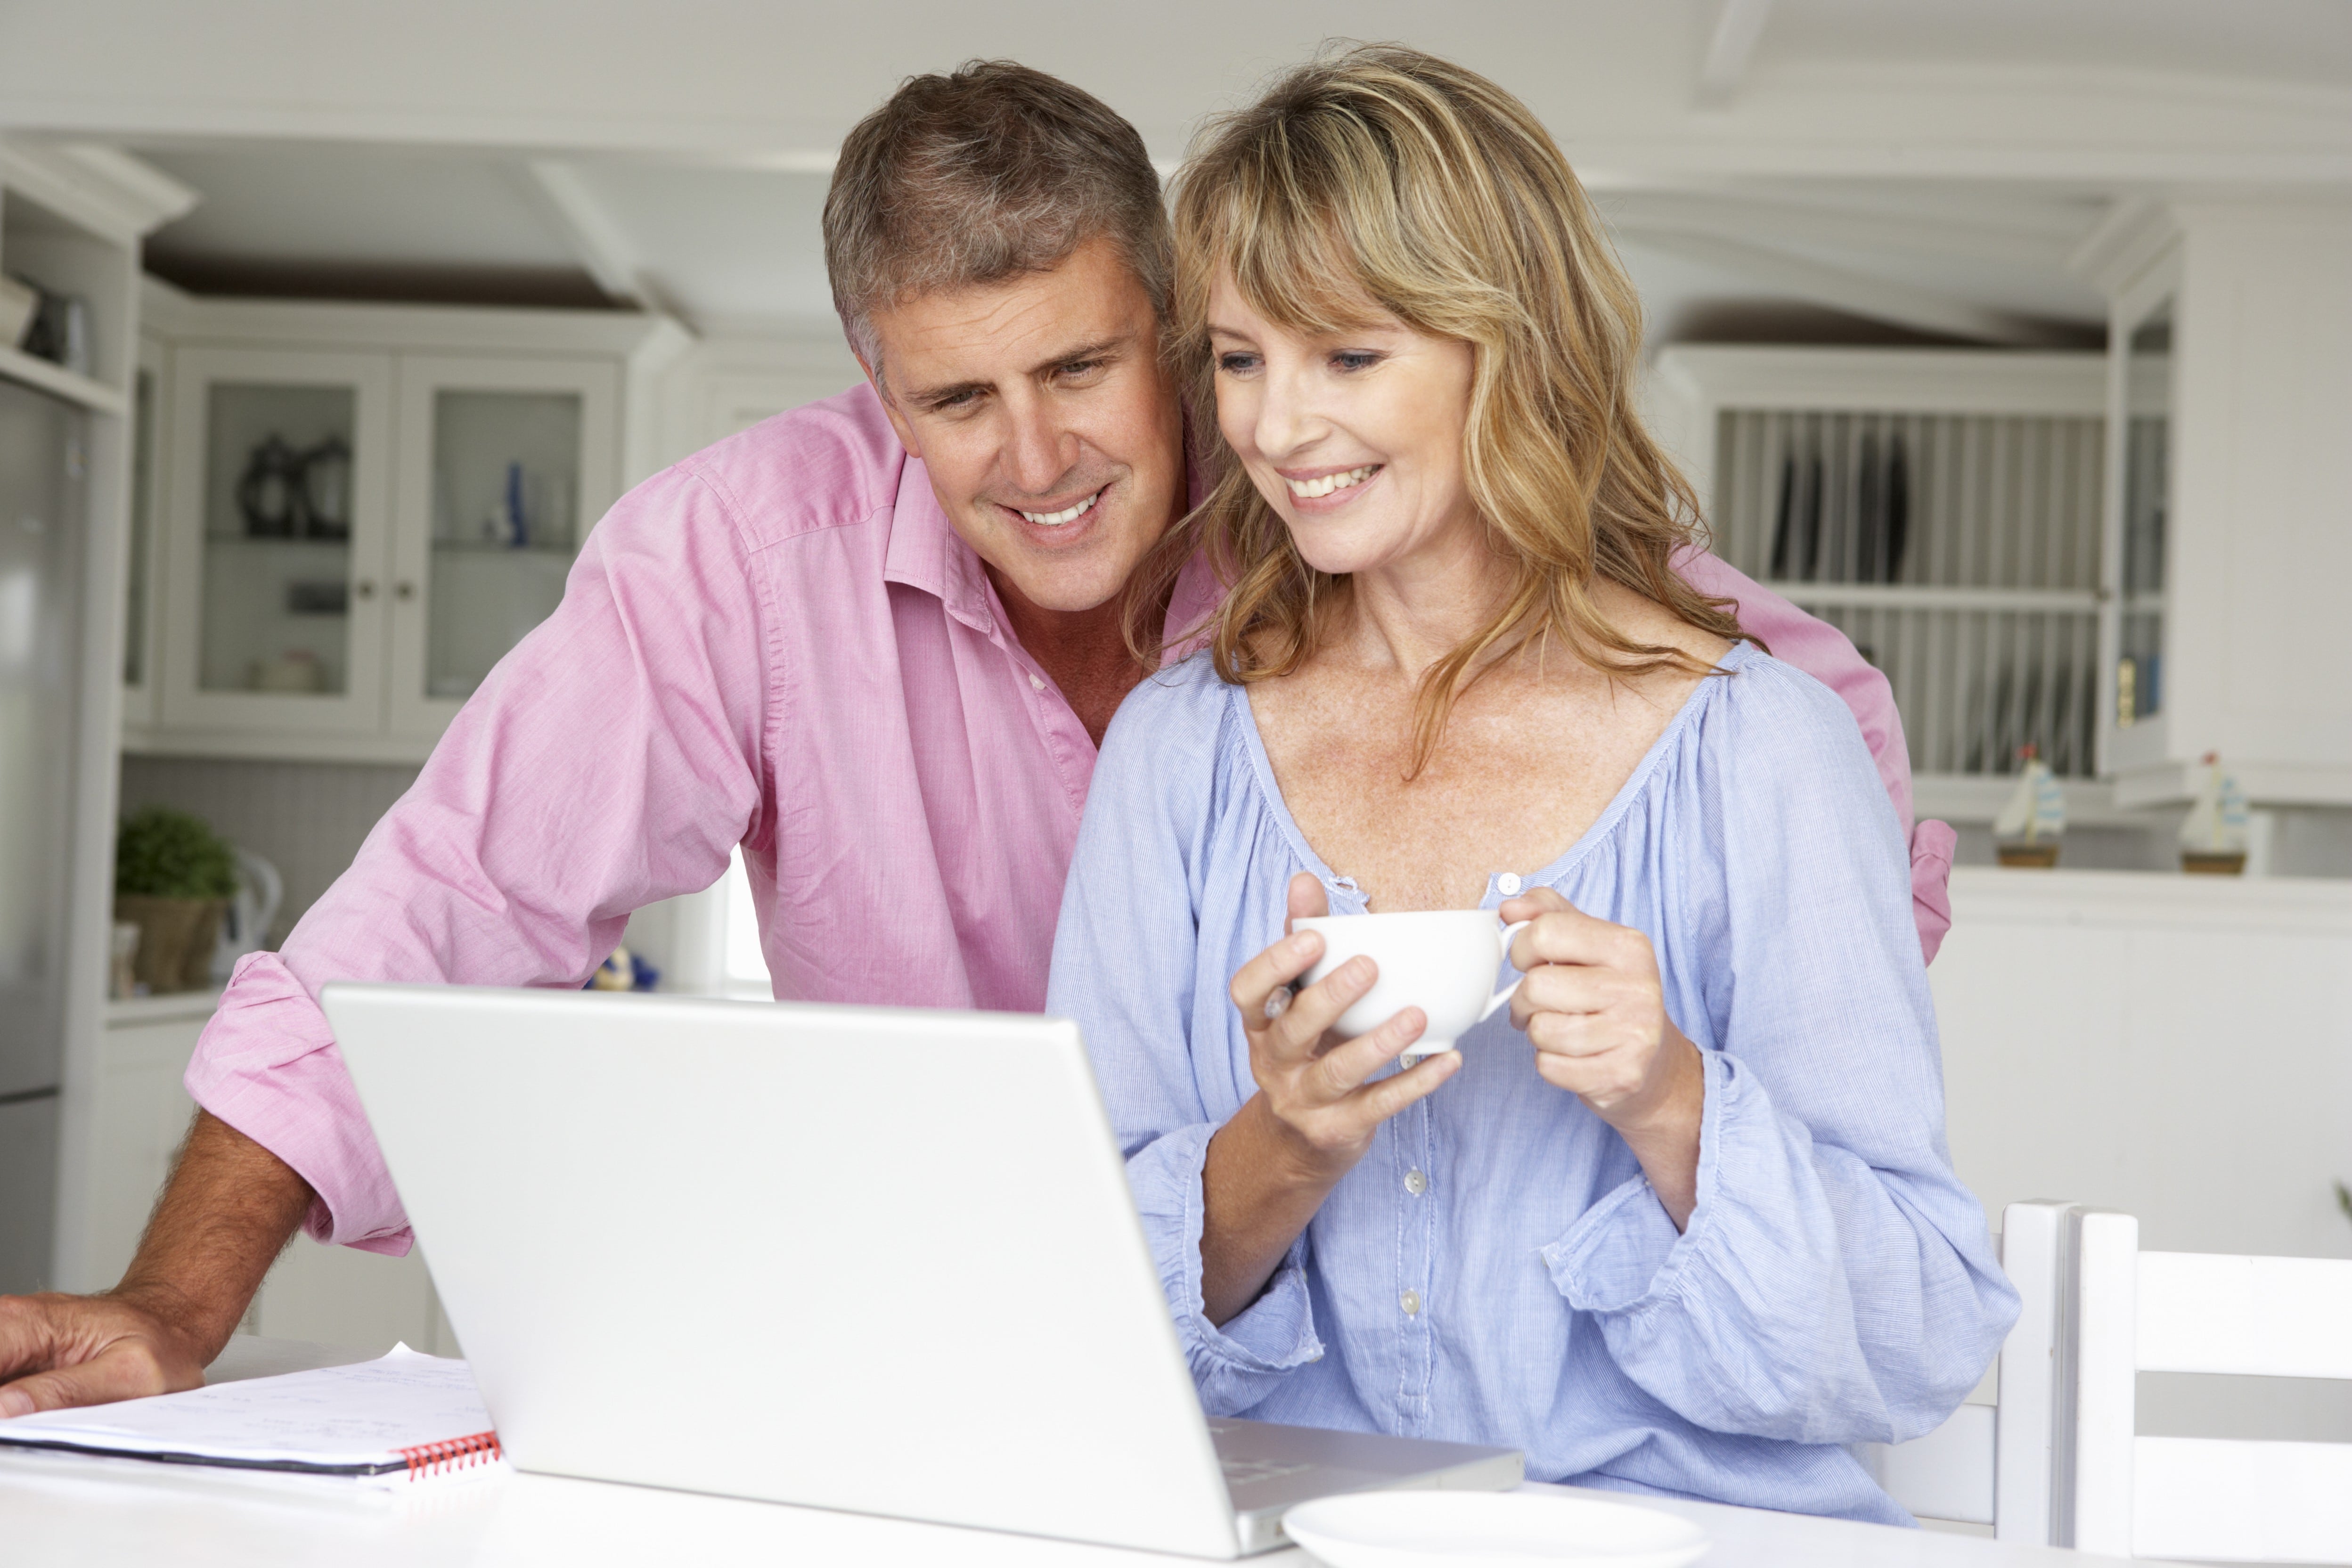 Couple Looking At A Laptop Together 